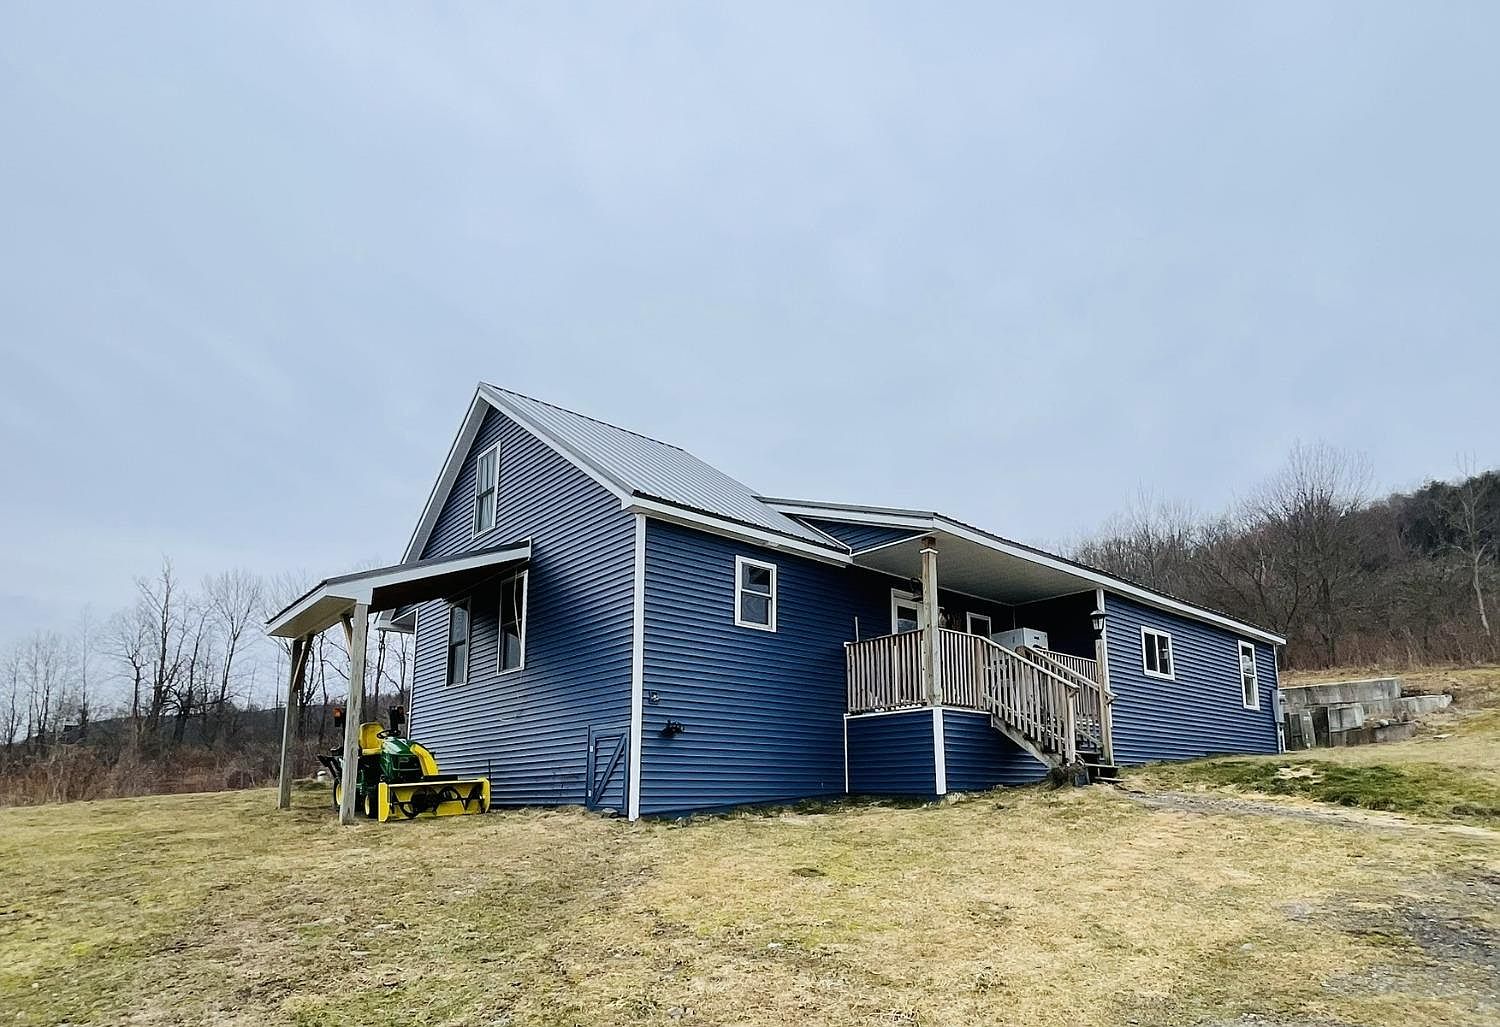 556 State Route 38, Dryden, NY 13053 | MLS #408200 | Zillow